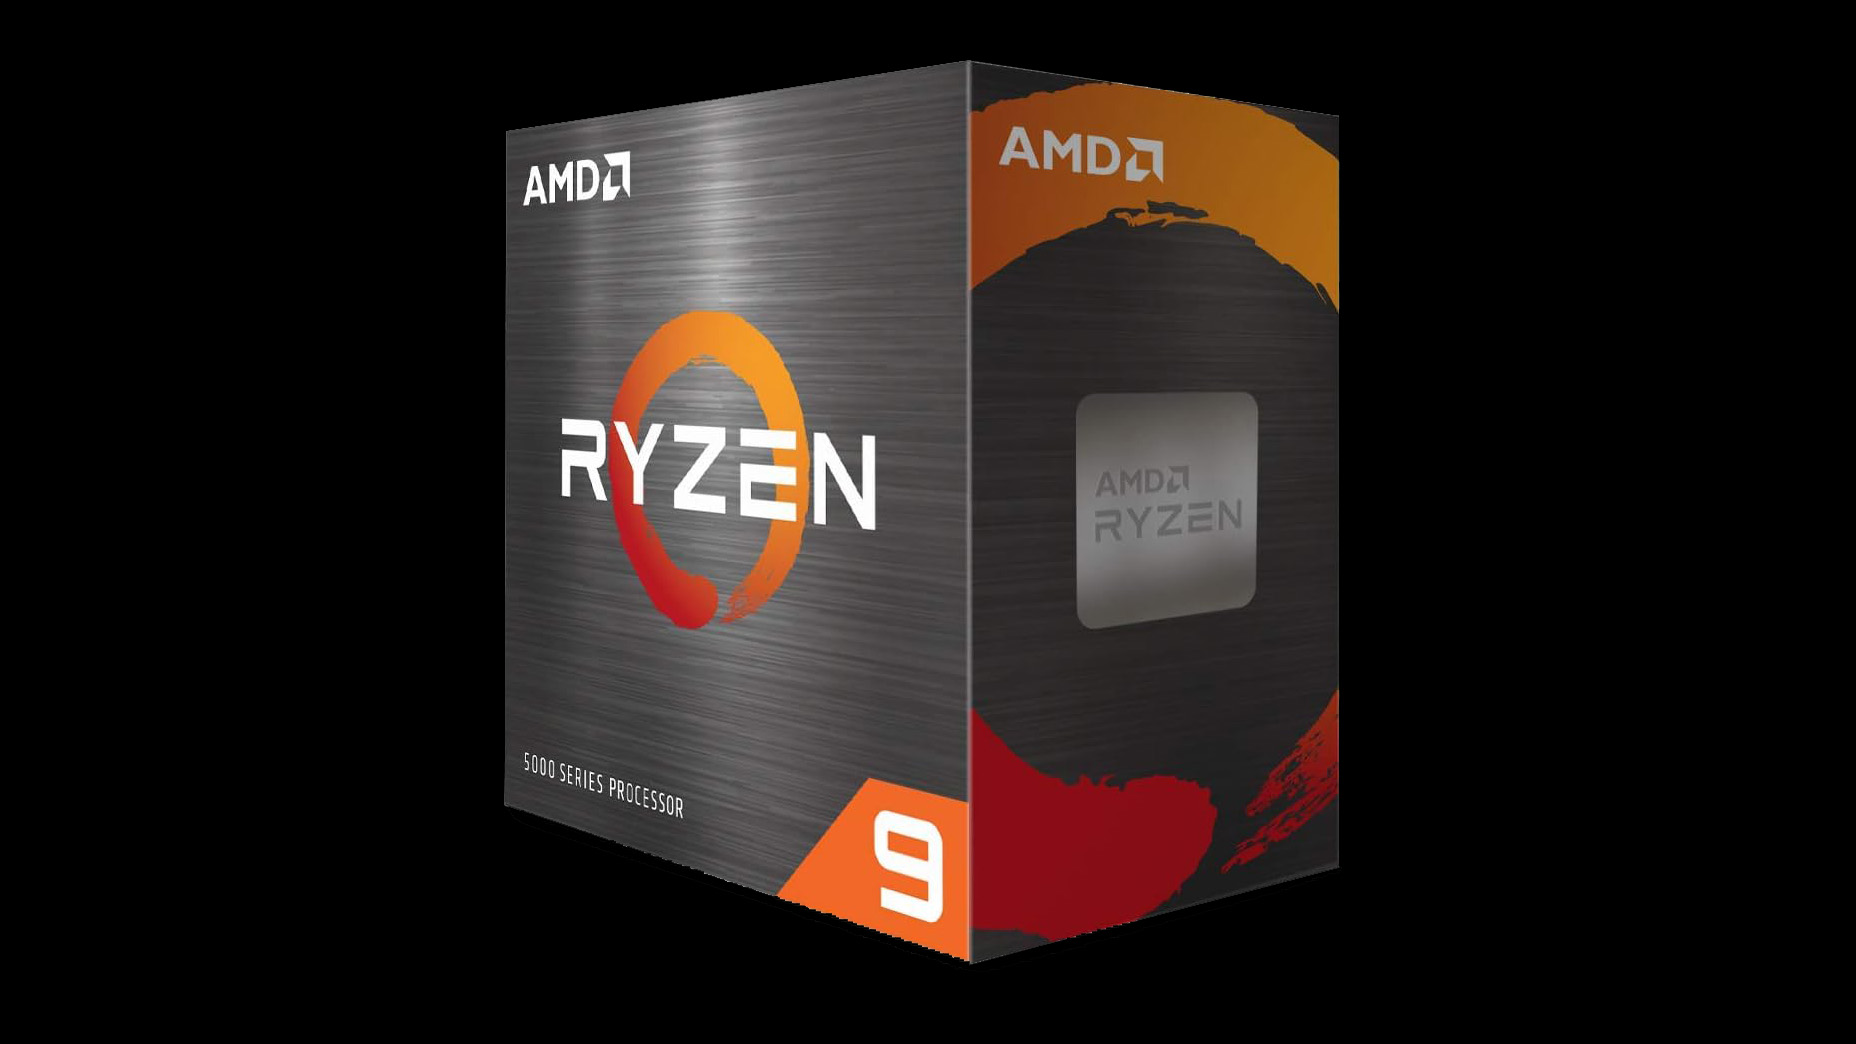 AMD's Ryzen 9 5900X is 50% off for Cyber Monday, delivering an